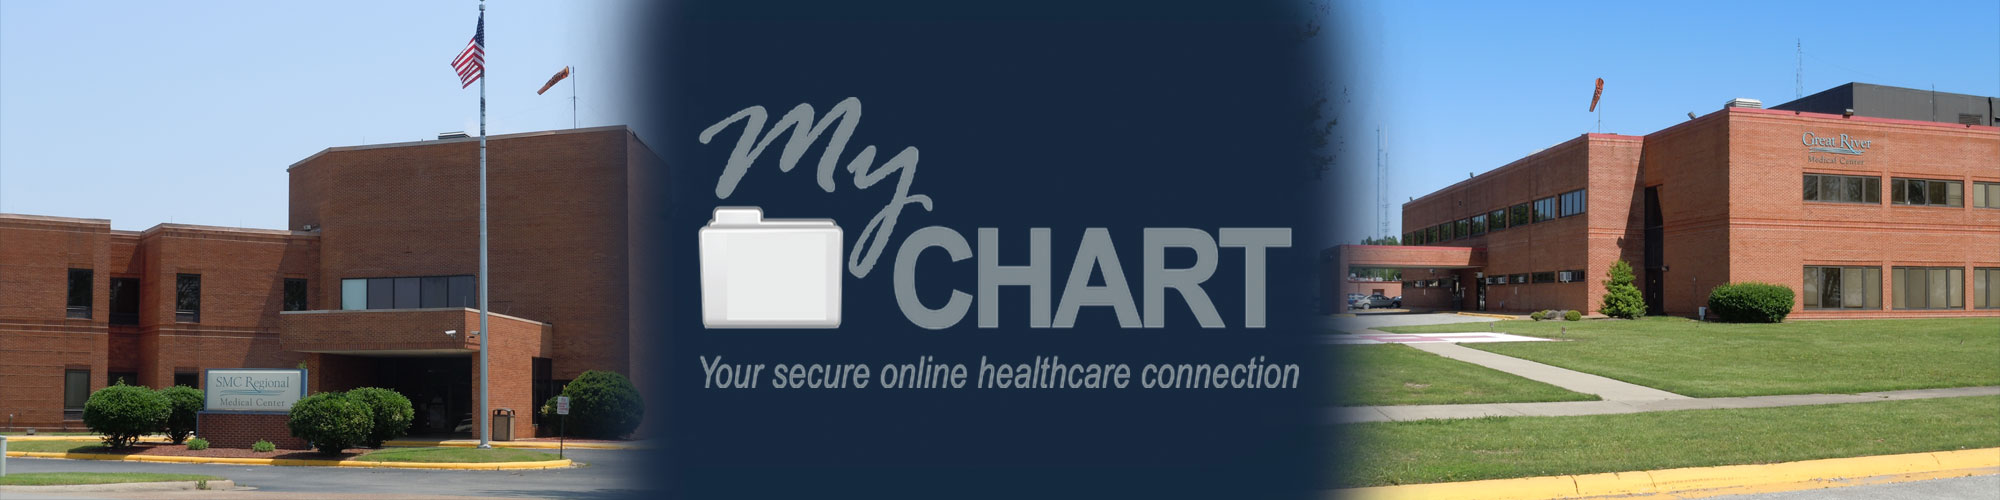 Banner picture of South Mississippi County Regional Medical Center and Great River Medical Center. Banner says:

My CHART (filing folder)
Your secure online healthcare connection